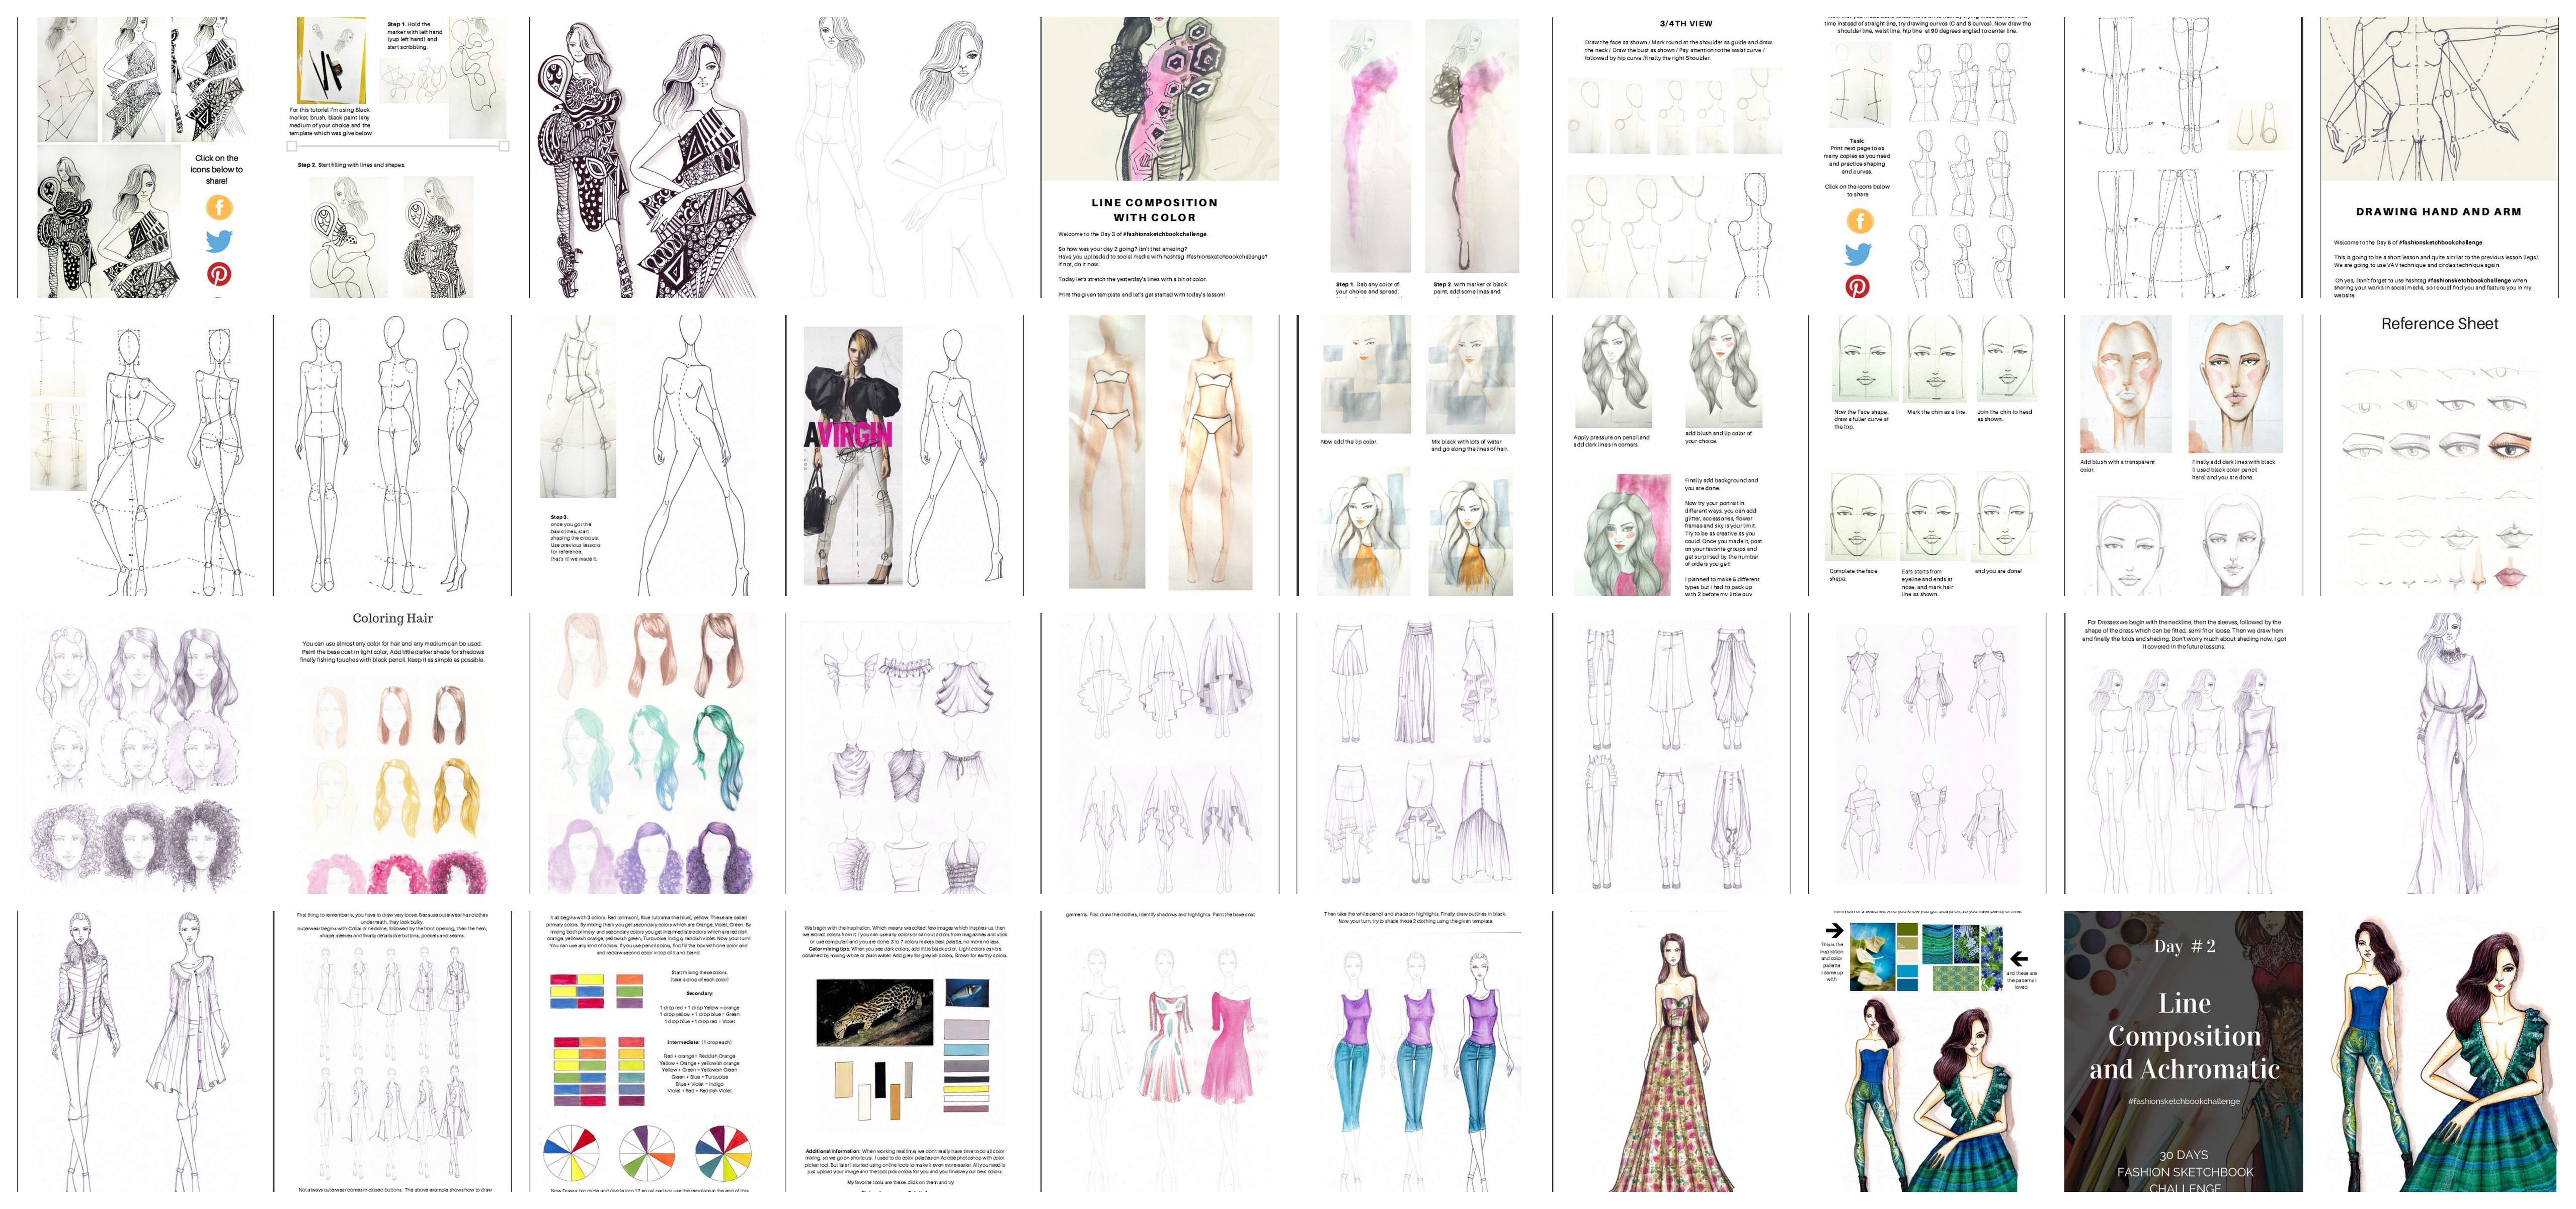 Learn step by step fashion design tutorials which includes fashion illustration, pattern drafting, sewing, fashion business and fashion freelancing with lots of free downloads and printables.And also Check out the free fashion sketching course here https://goo.gl/bTalfd